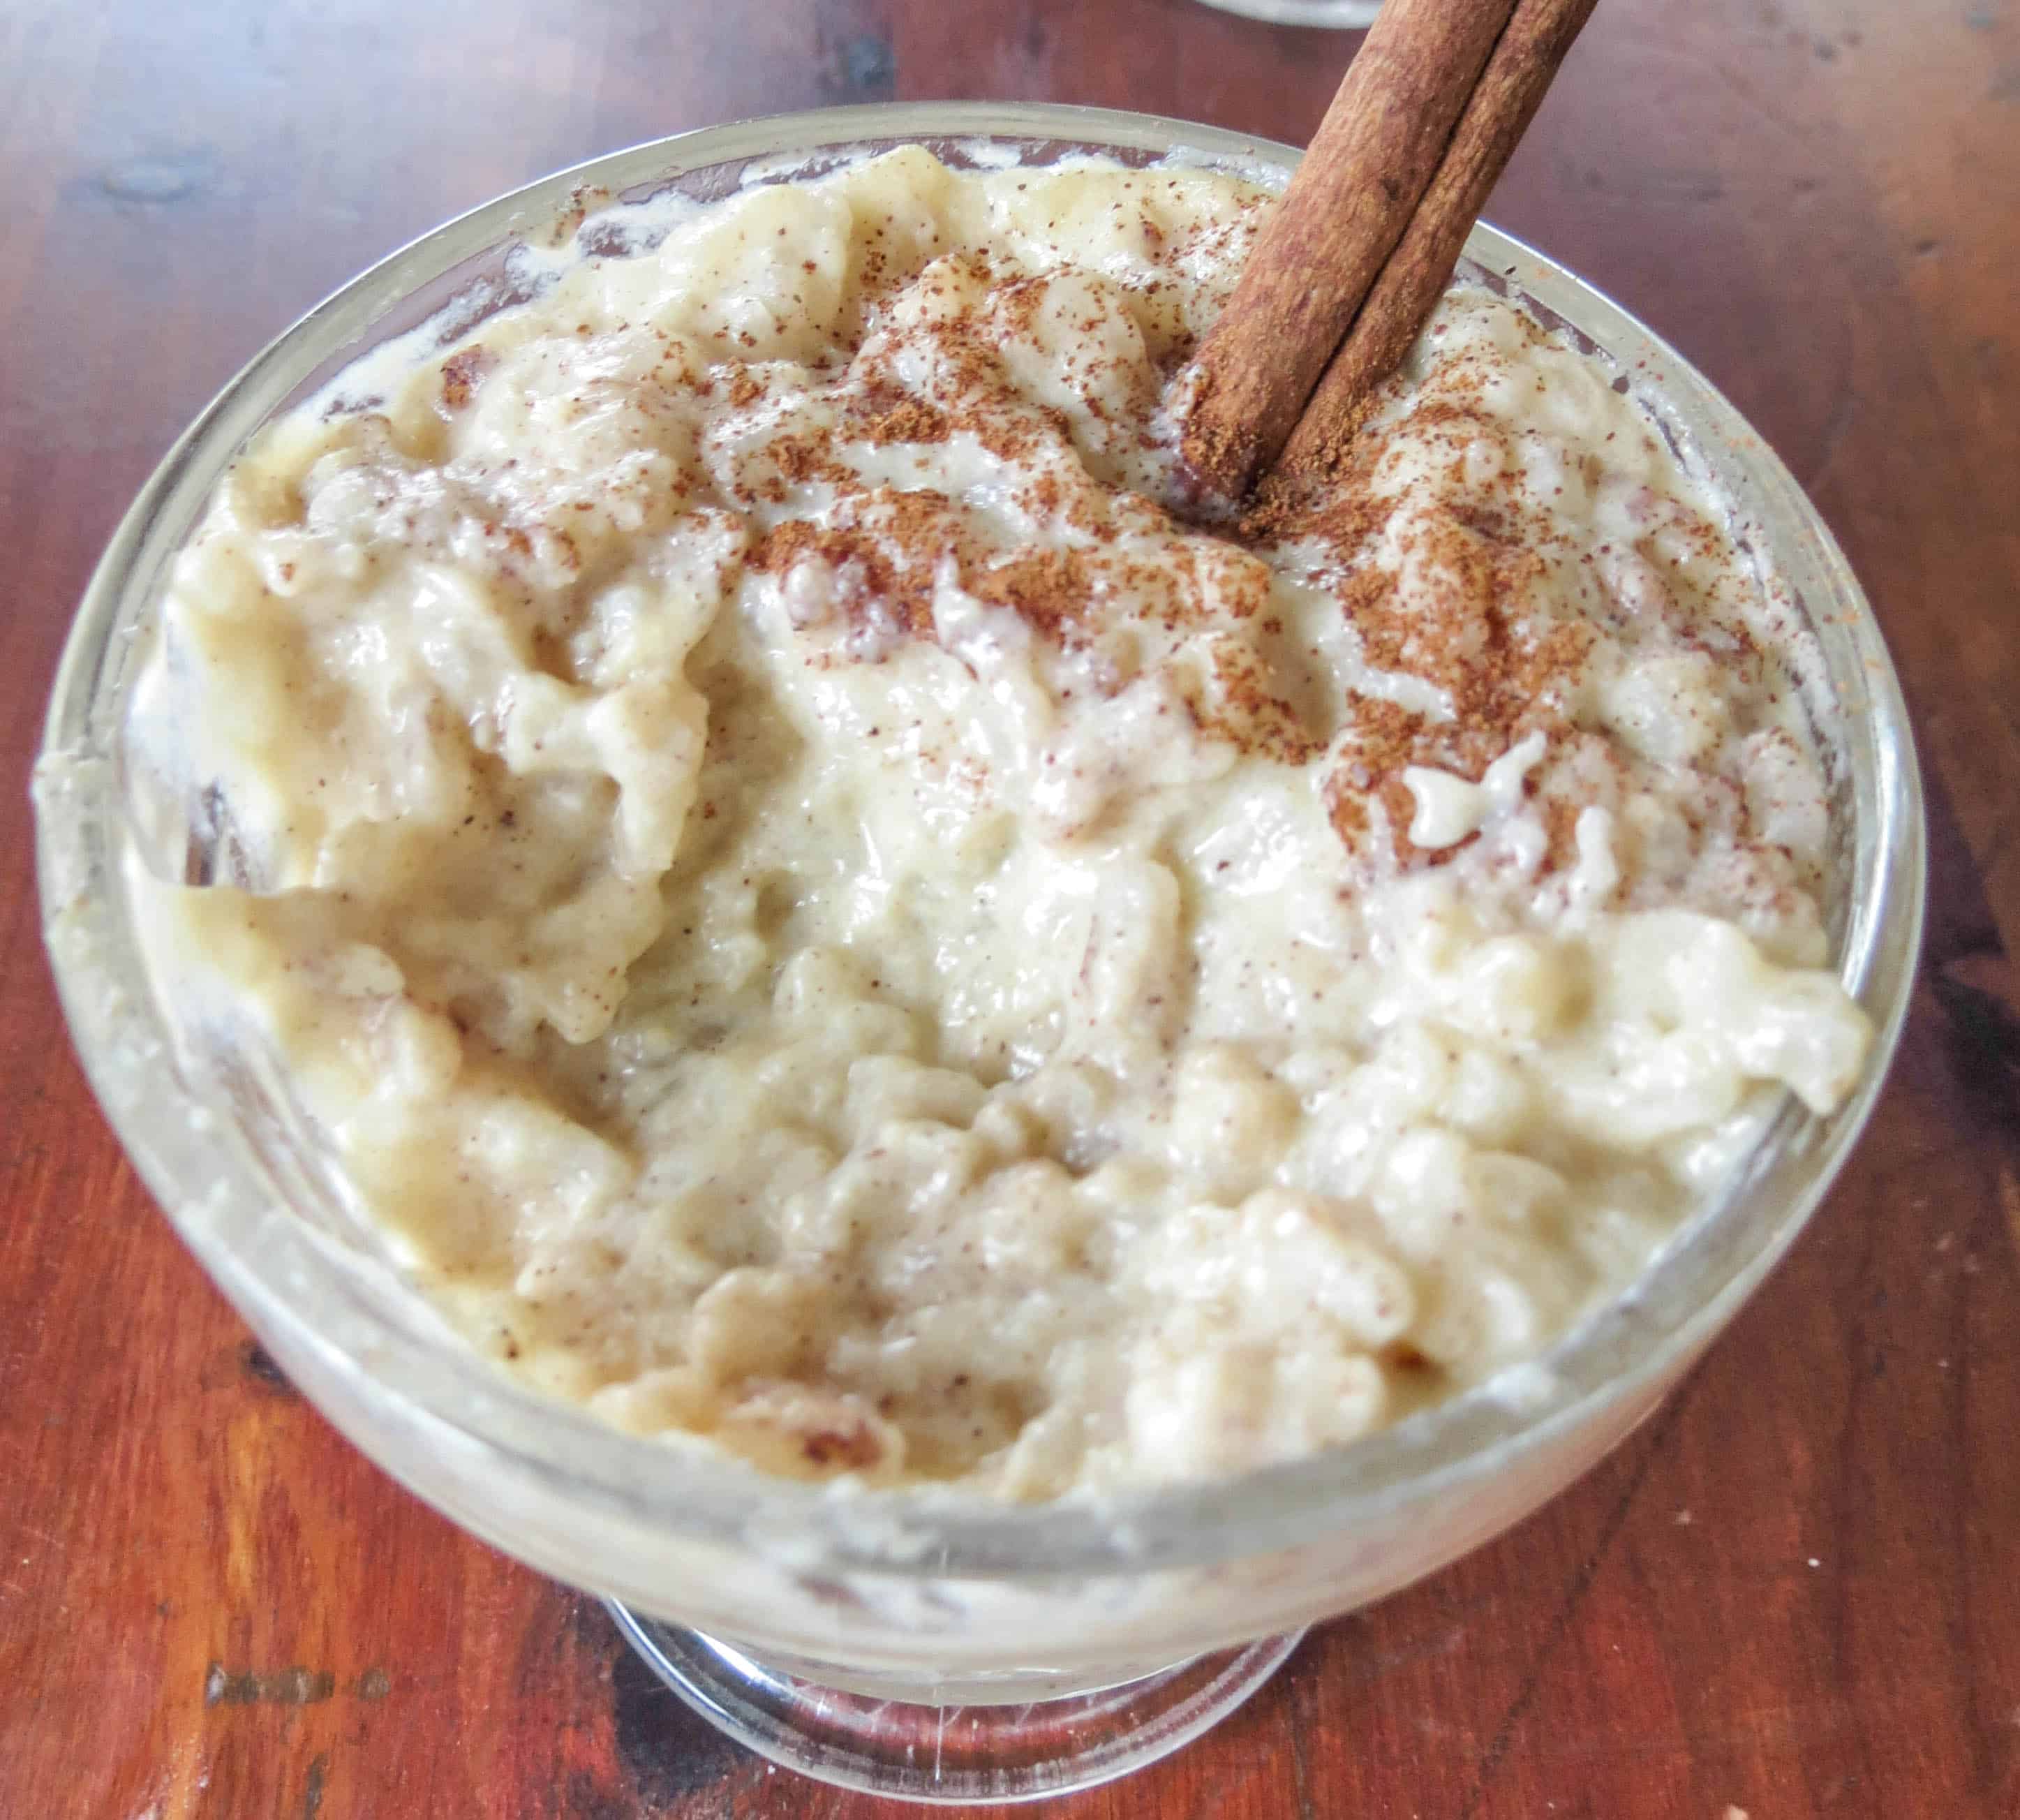 Homemade creamy rice pudding in a clear glass cup with cinnamon sprinkled on top and a cinnamon stick stuck in. There is a bite mixing to reveal texture.